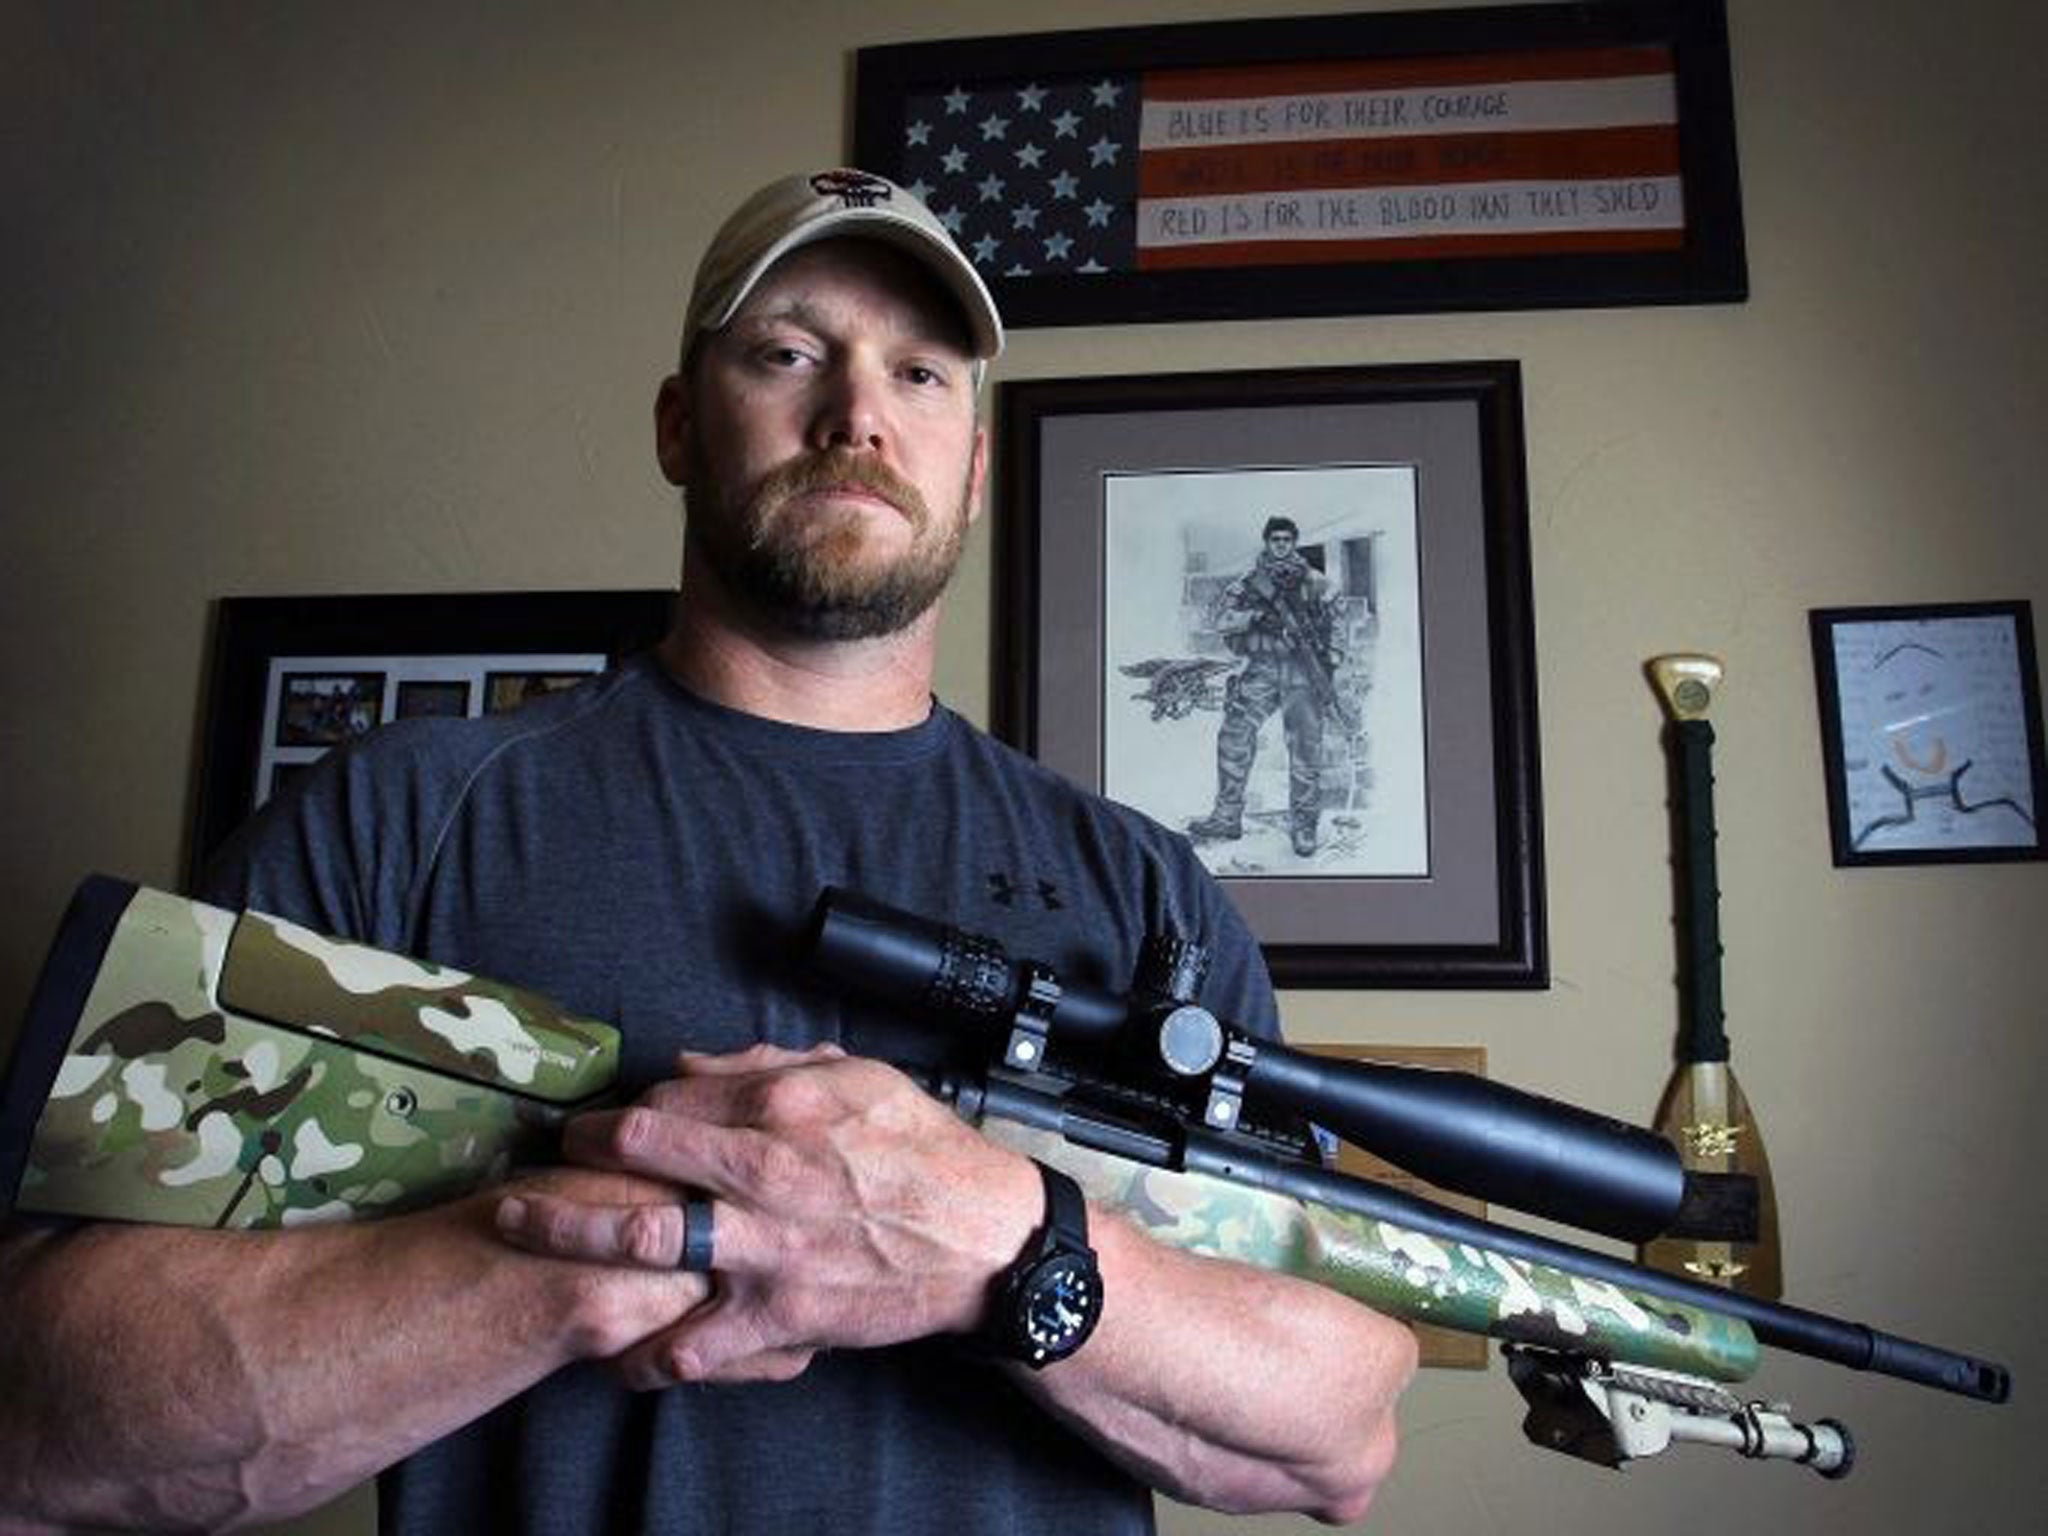 Best-selling author and former US Navy SEAL Chris Kyle has been shot dead along with another man on a gun range, police in Texas said.